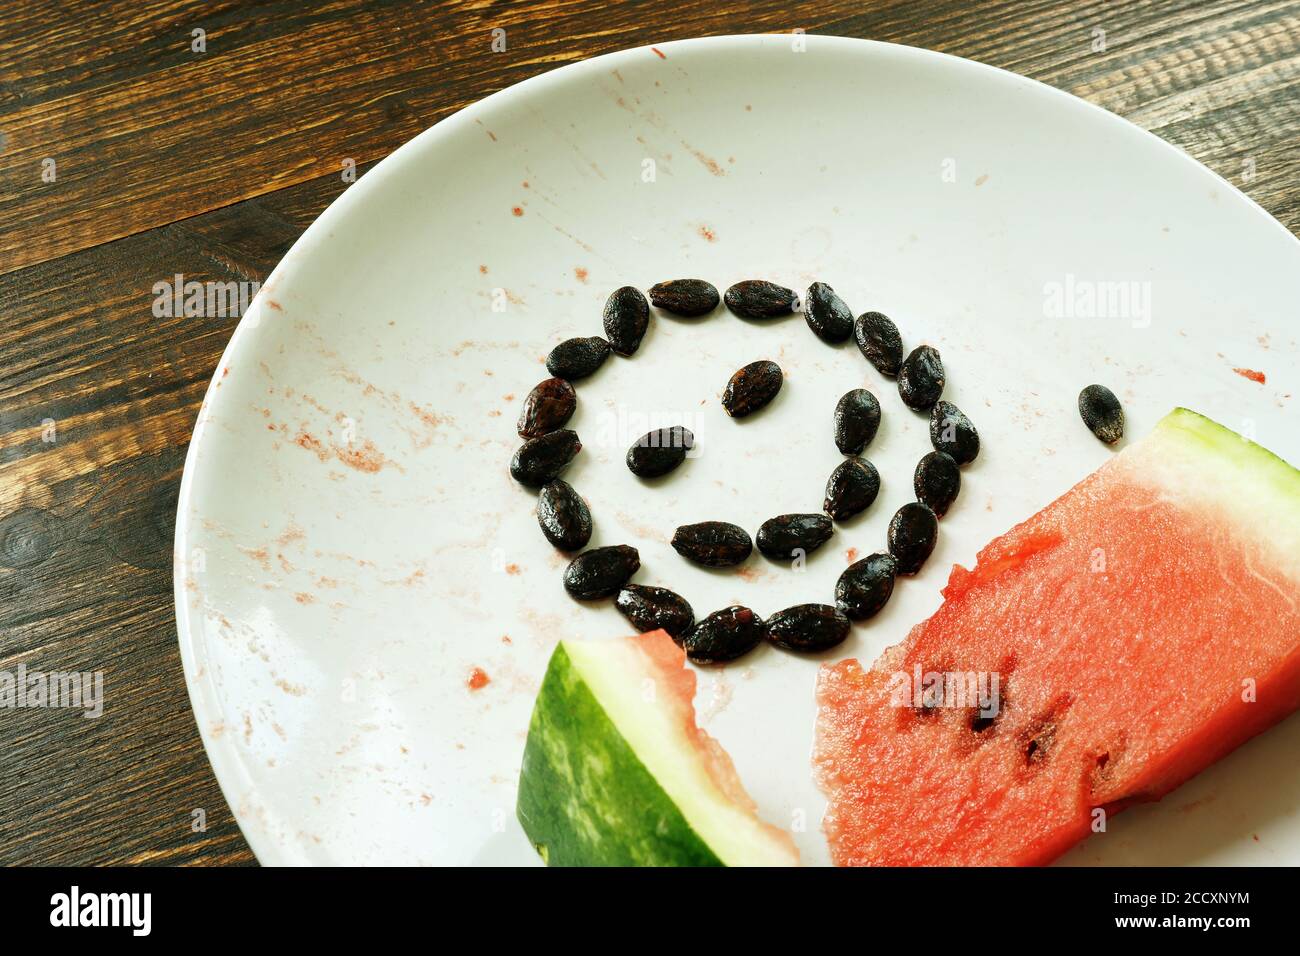 A slice of watermelon and a smile on plate. Healthy food in summer. Stock Photo